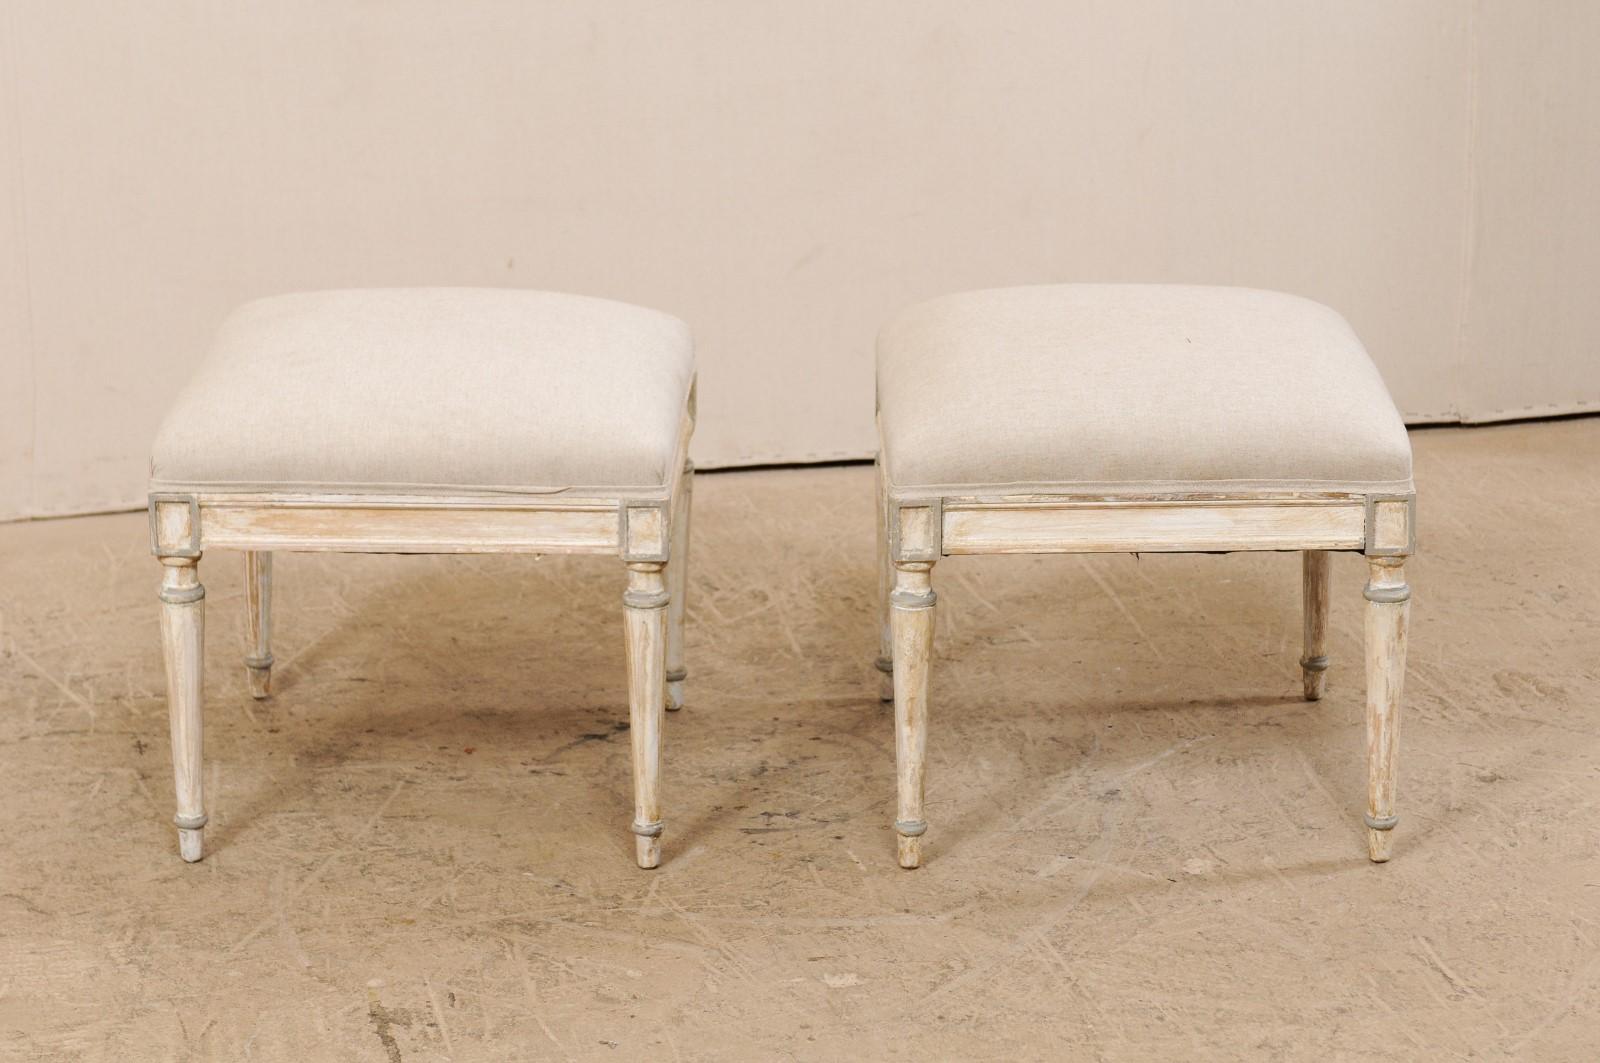 Pair of French Painted Wood Stools, circa 1920s (Geschnitzt)